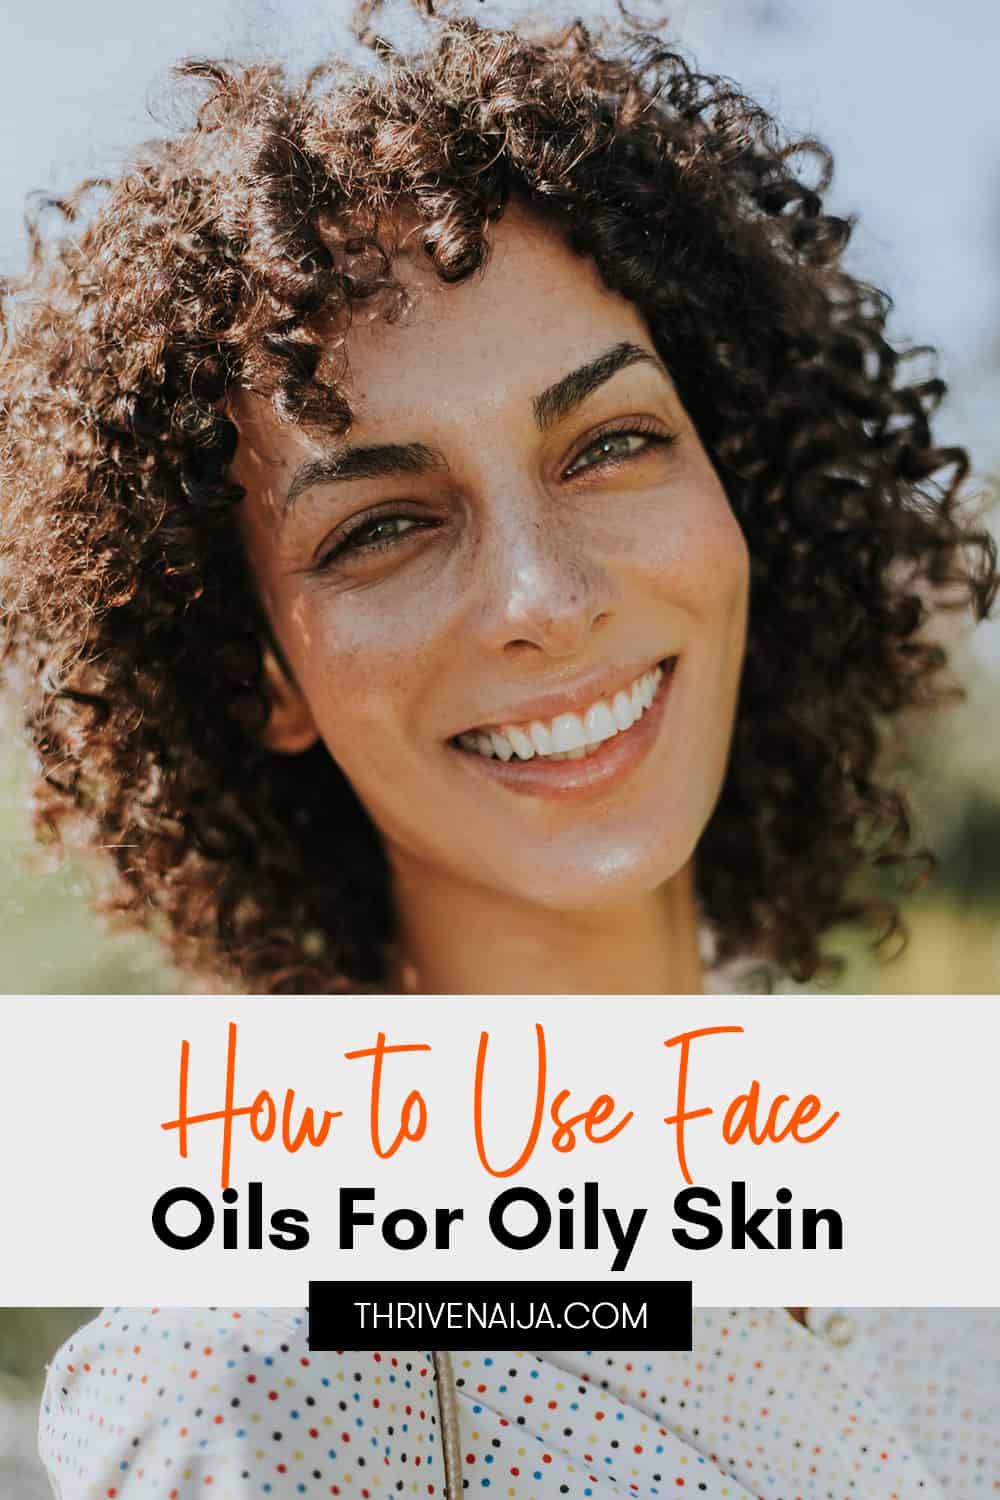 How to Use Face Oils For Oily Skin